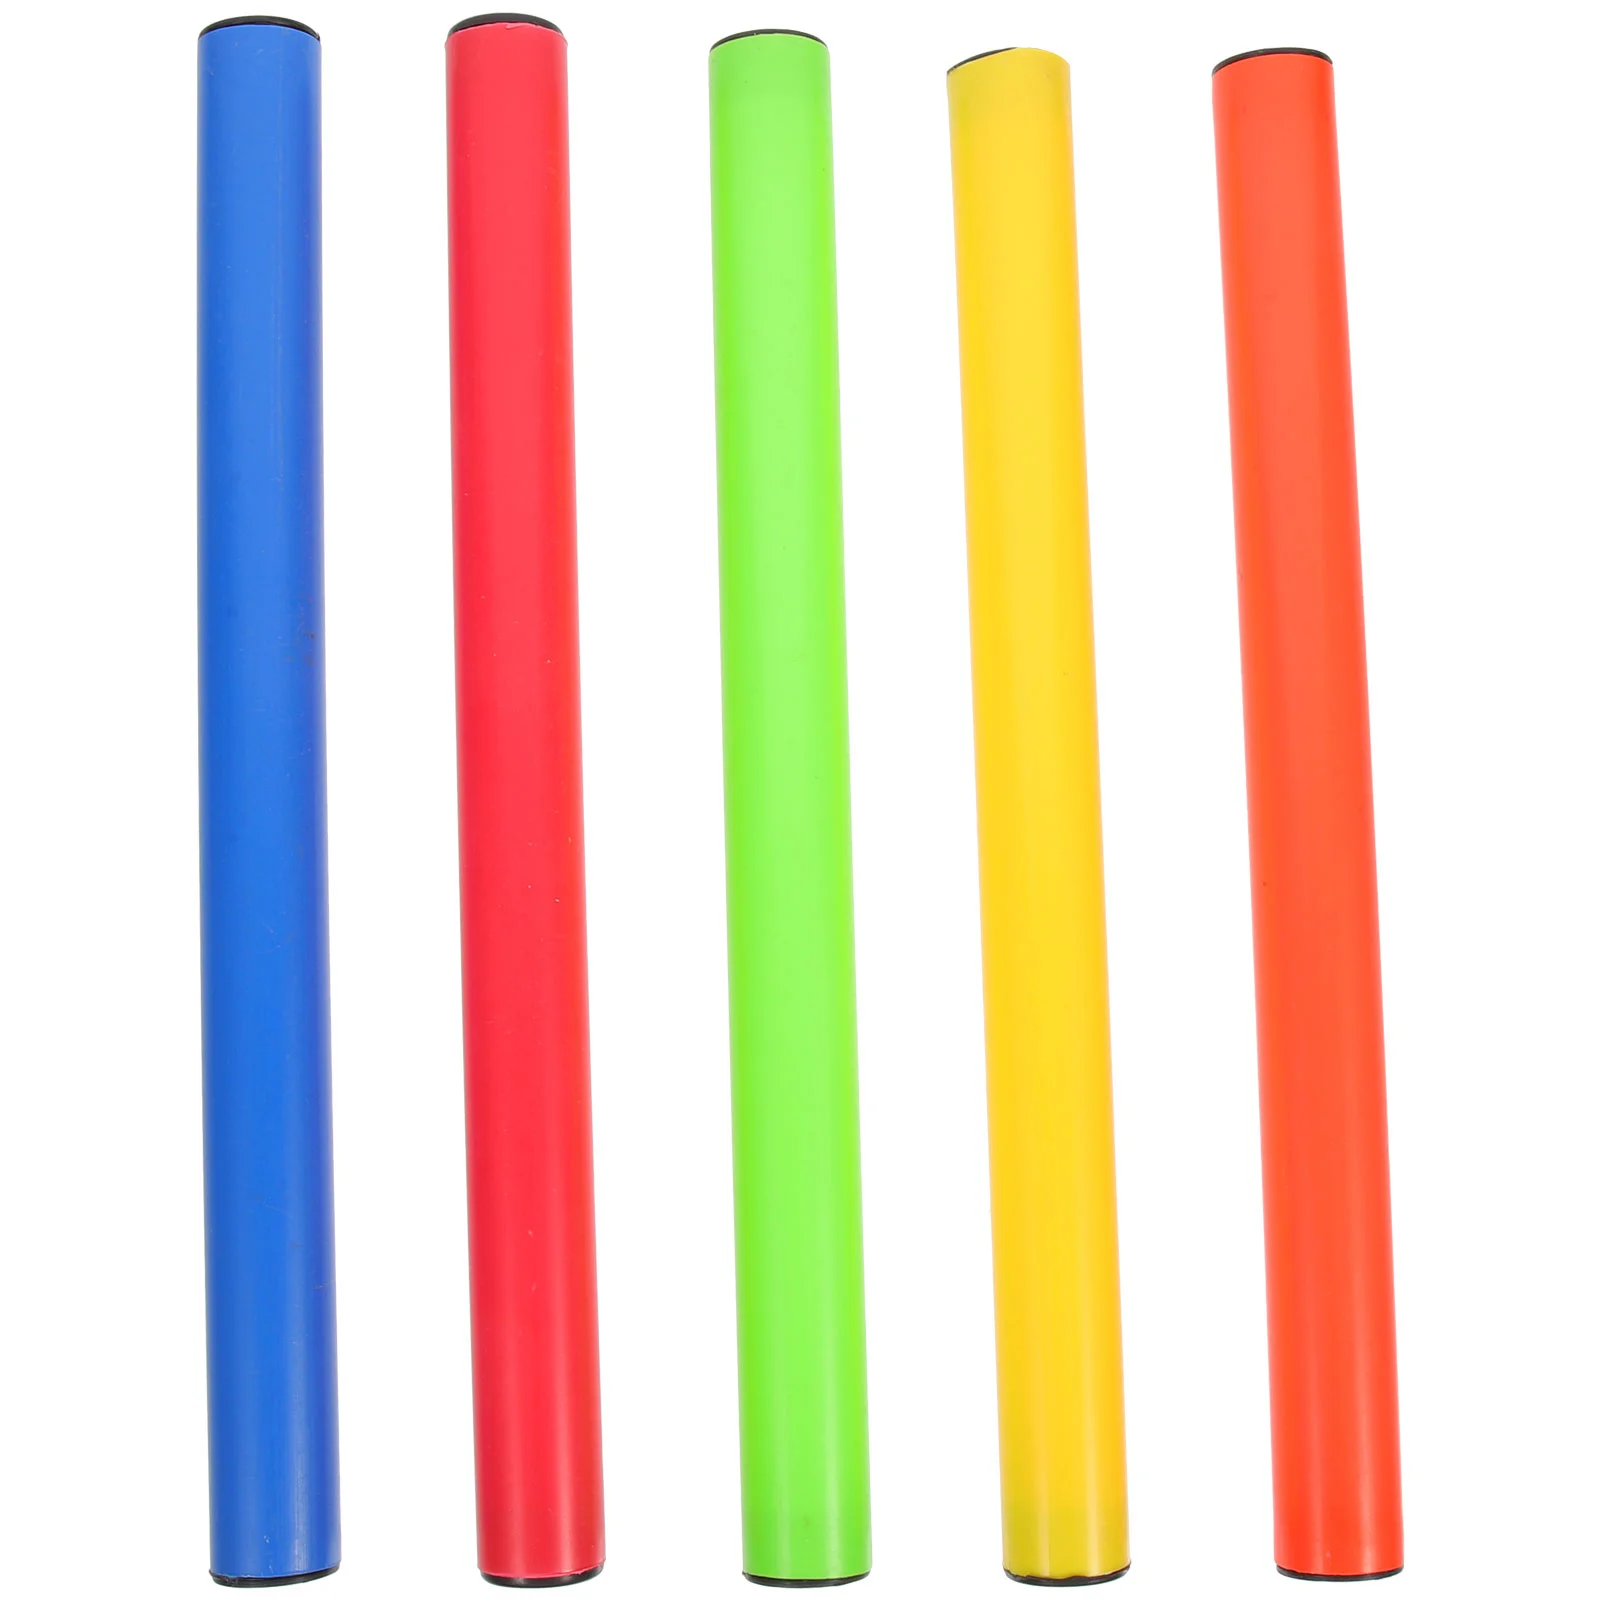 

5 Pcs Tools Field Relay Stick Competition Sticks Kids Relaying Racing Accessory Running Race Training Child